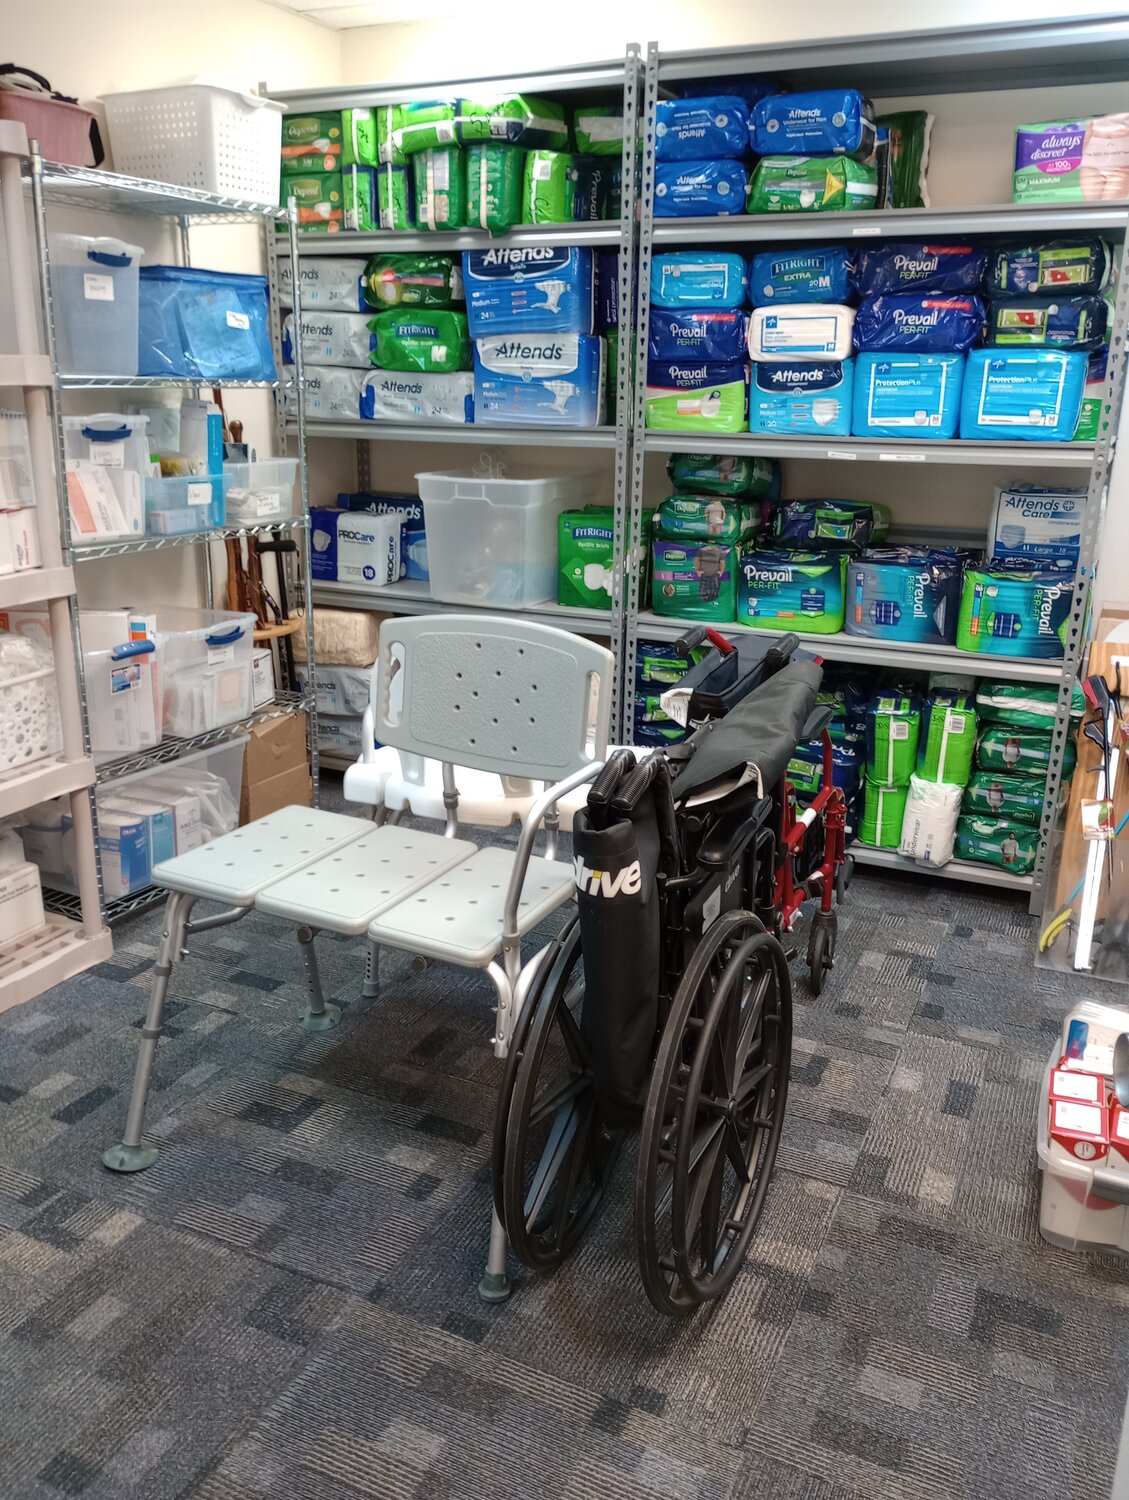 Through Better Health's Medical Equipment program, equipment can be loaned out for up to six months, including wheelchairs, transport chairs, knee scooters, walkers, shower benches, bedside commodes, etc., to clients in need.  